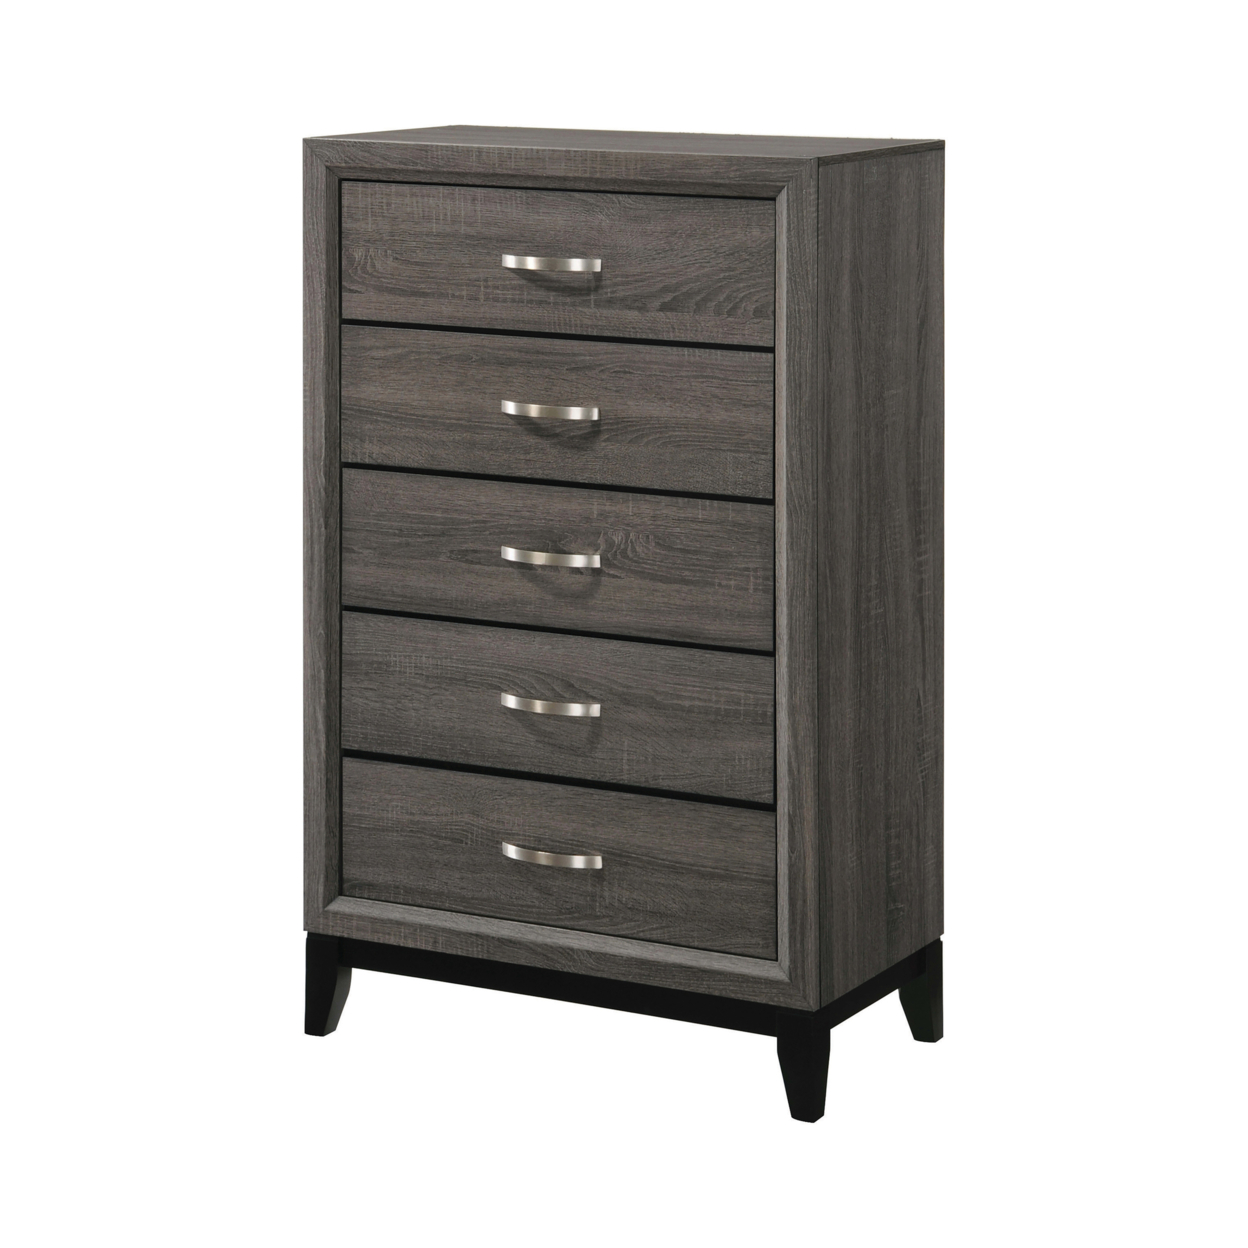 5 Drawer Transitional Chest With Chamfered Feet And Curved Handles, Gray- Saltoro Sherpi